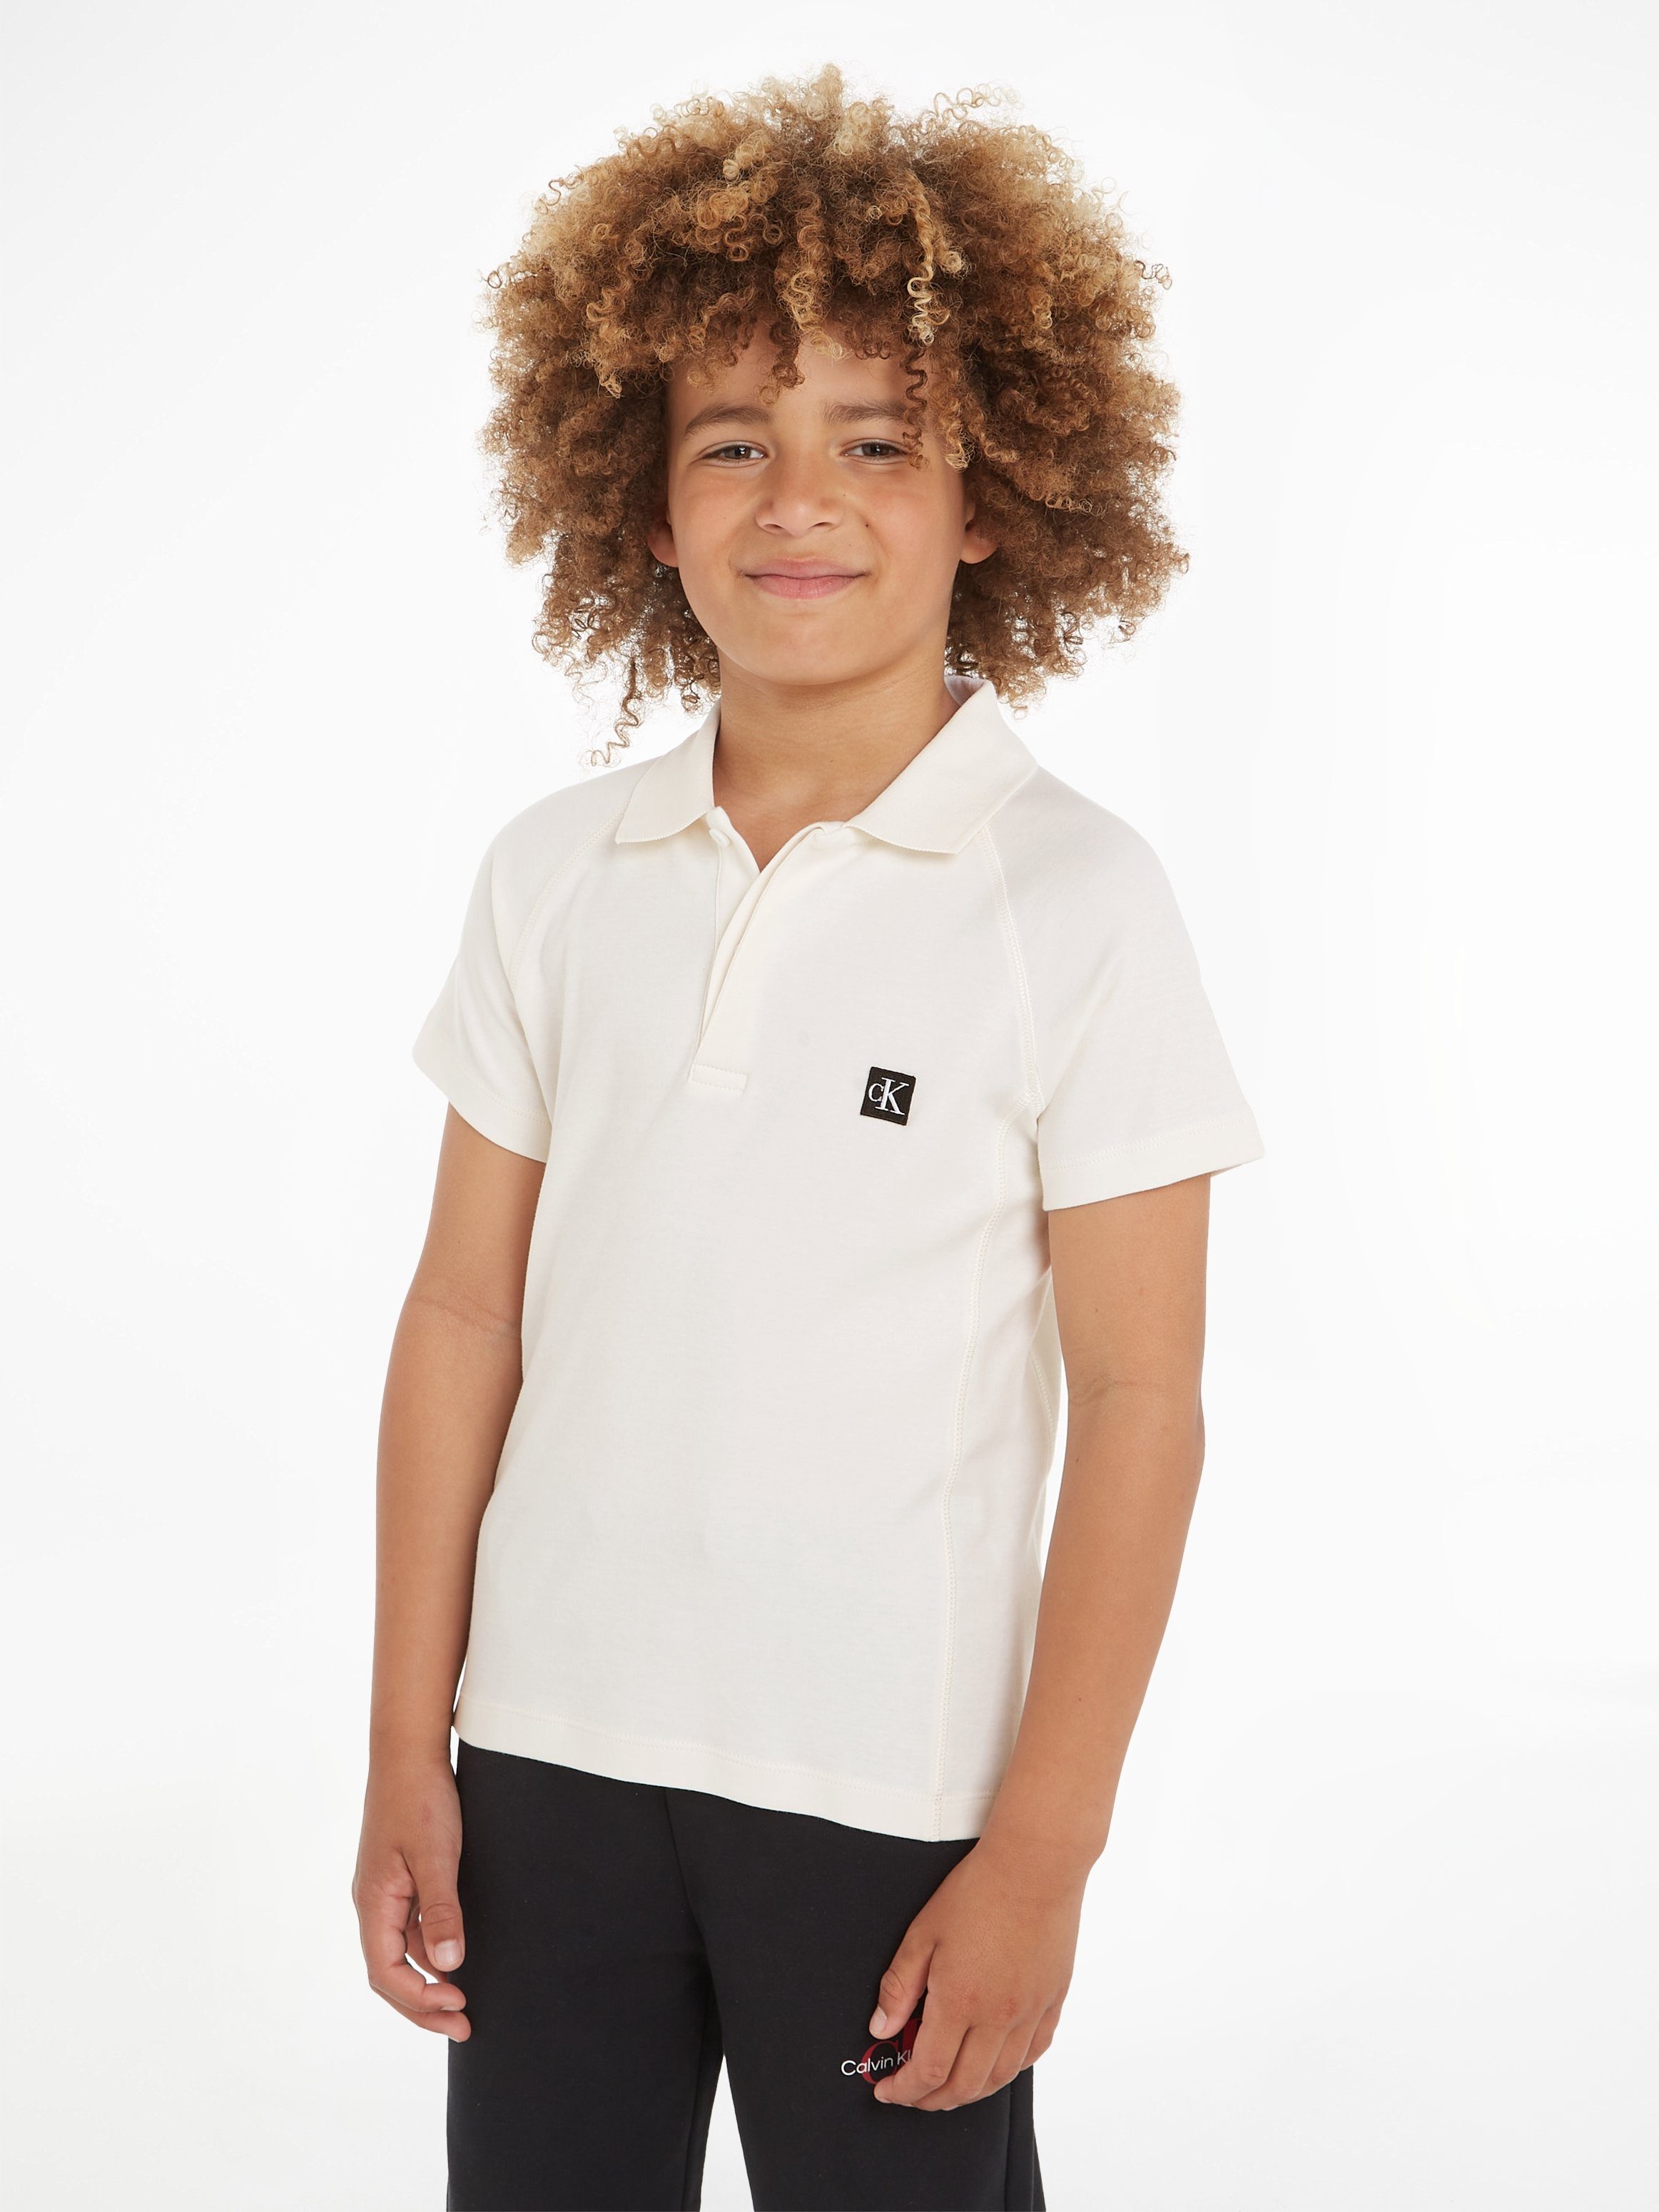 JERSEY CEREMONY White mit Jeans POLO Bright SOFT Poloshirt Logopatch Klein Calvin